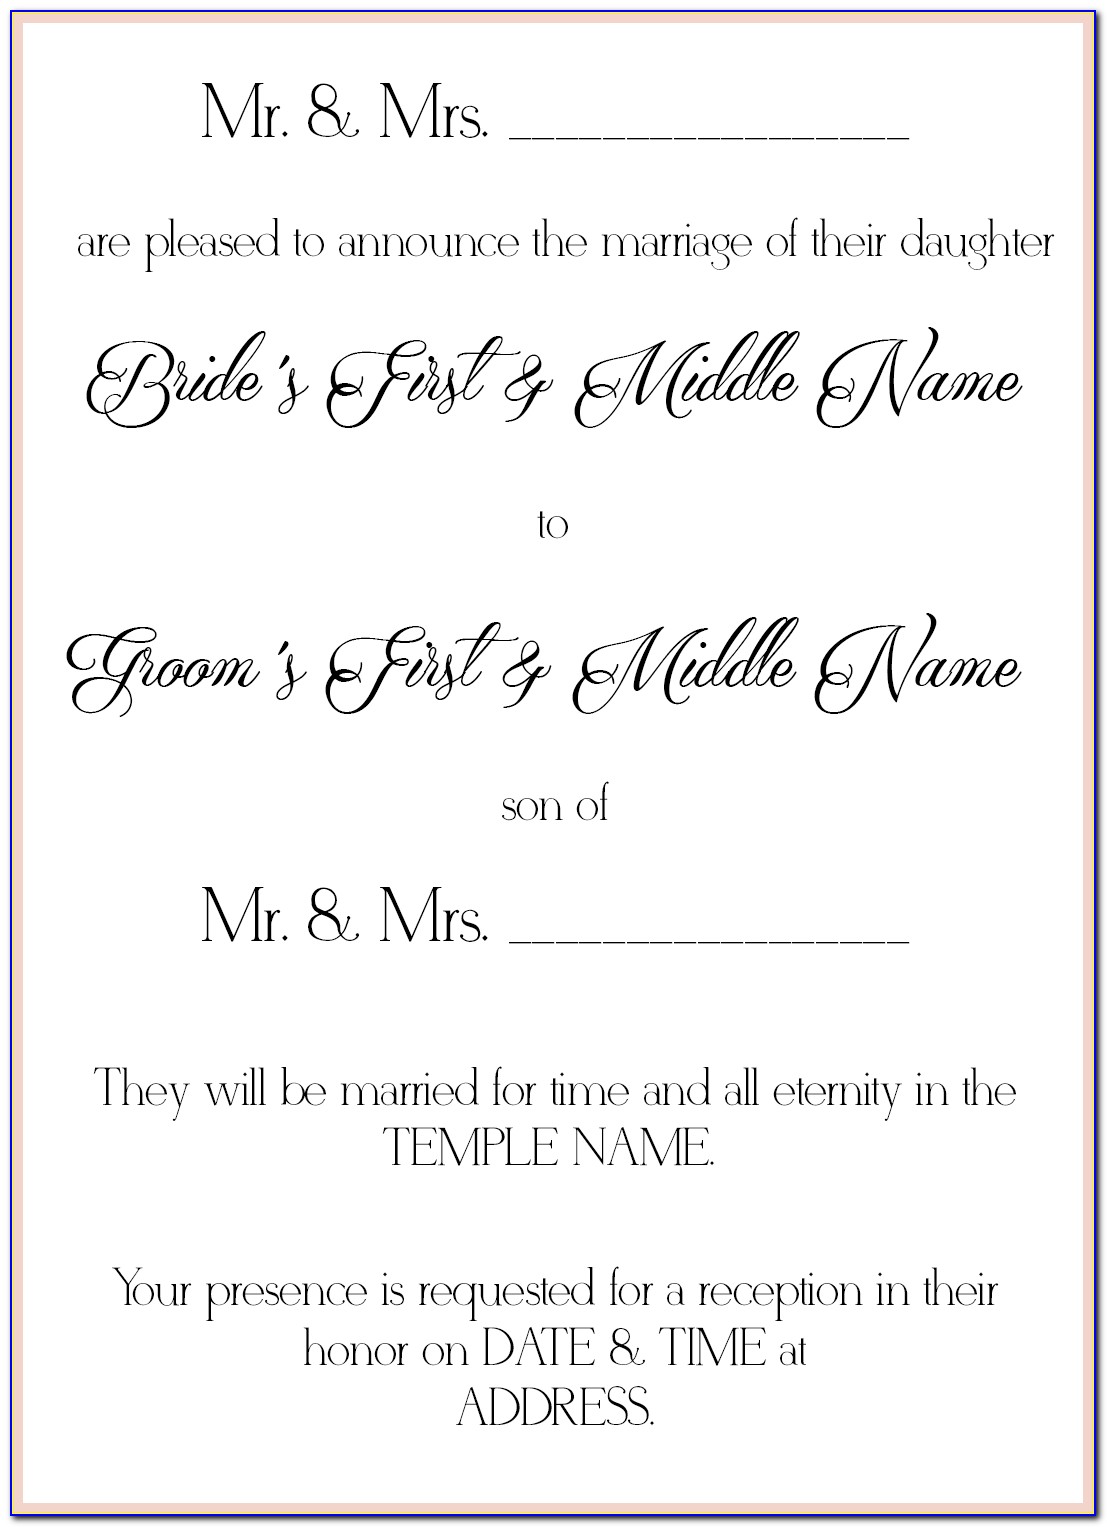 Morning Call Wedding Announcements